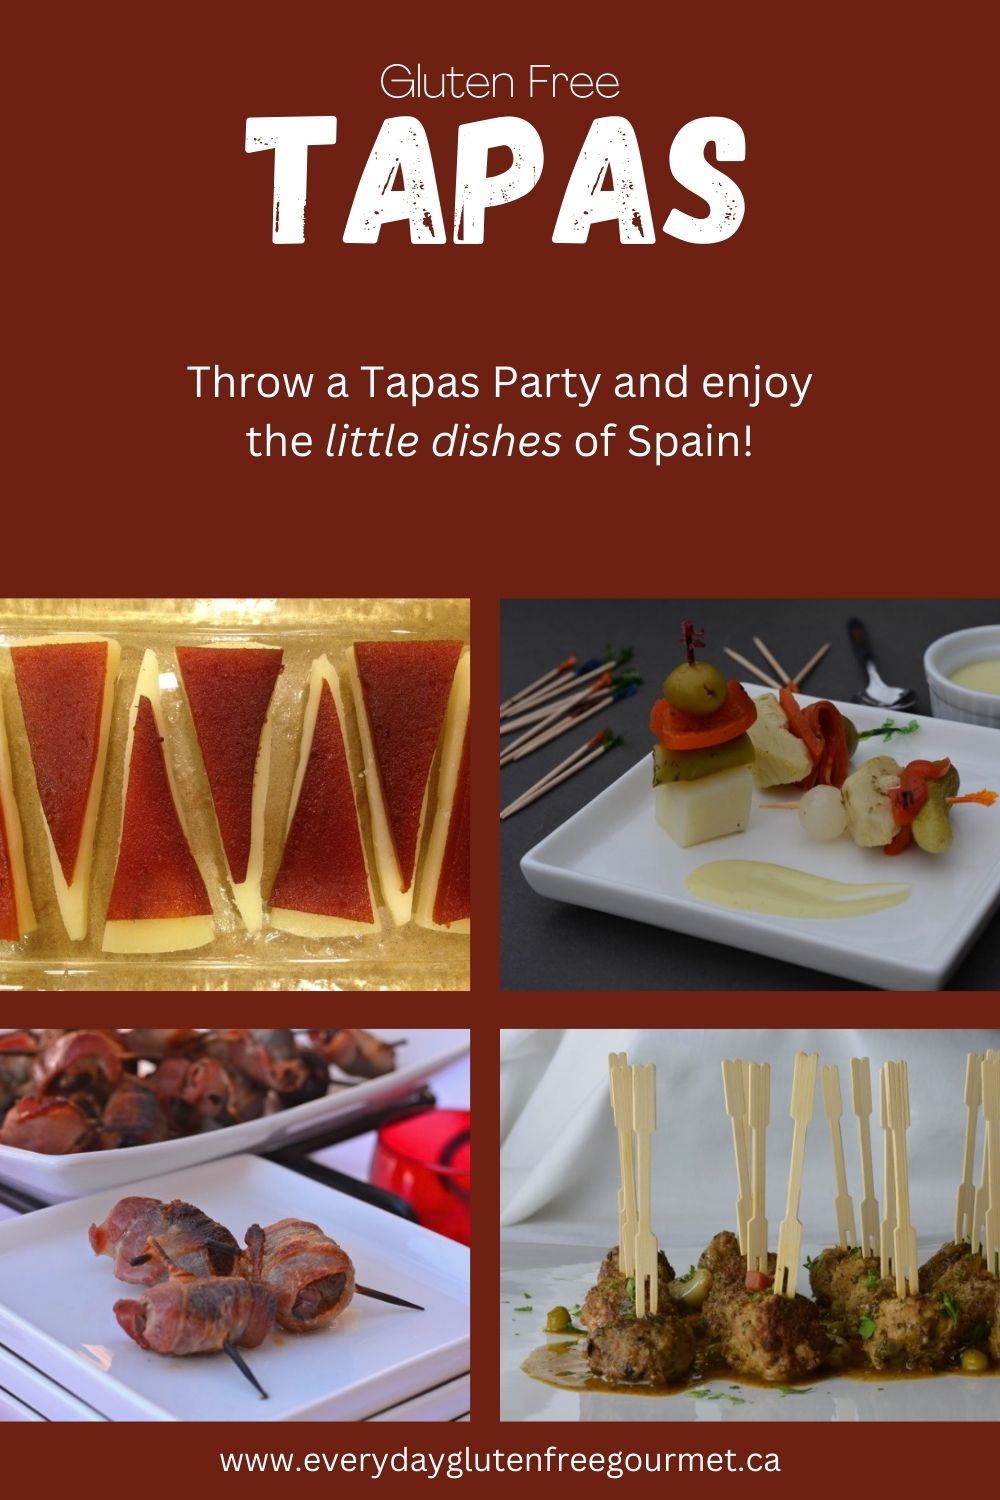 4 gluten free tapas recipes; Manchego Cheese with quince paste, banderillas, meatballs in almond sauce and chorizo stuffed dates.